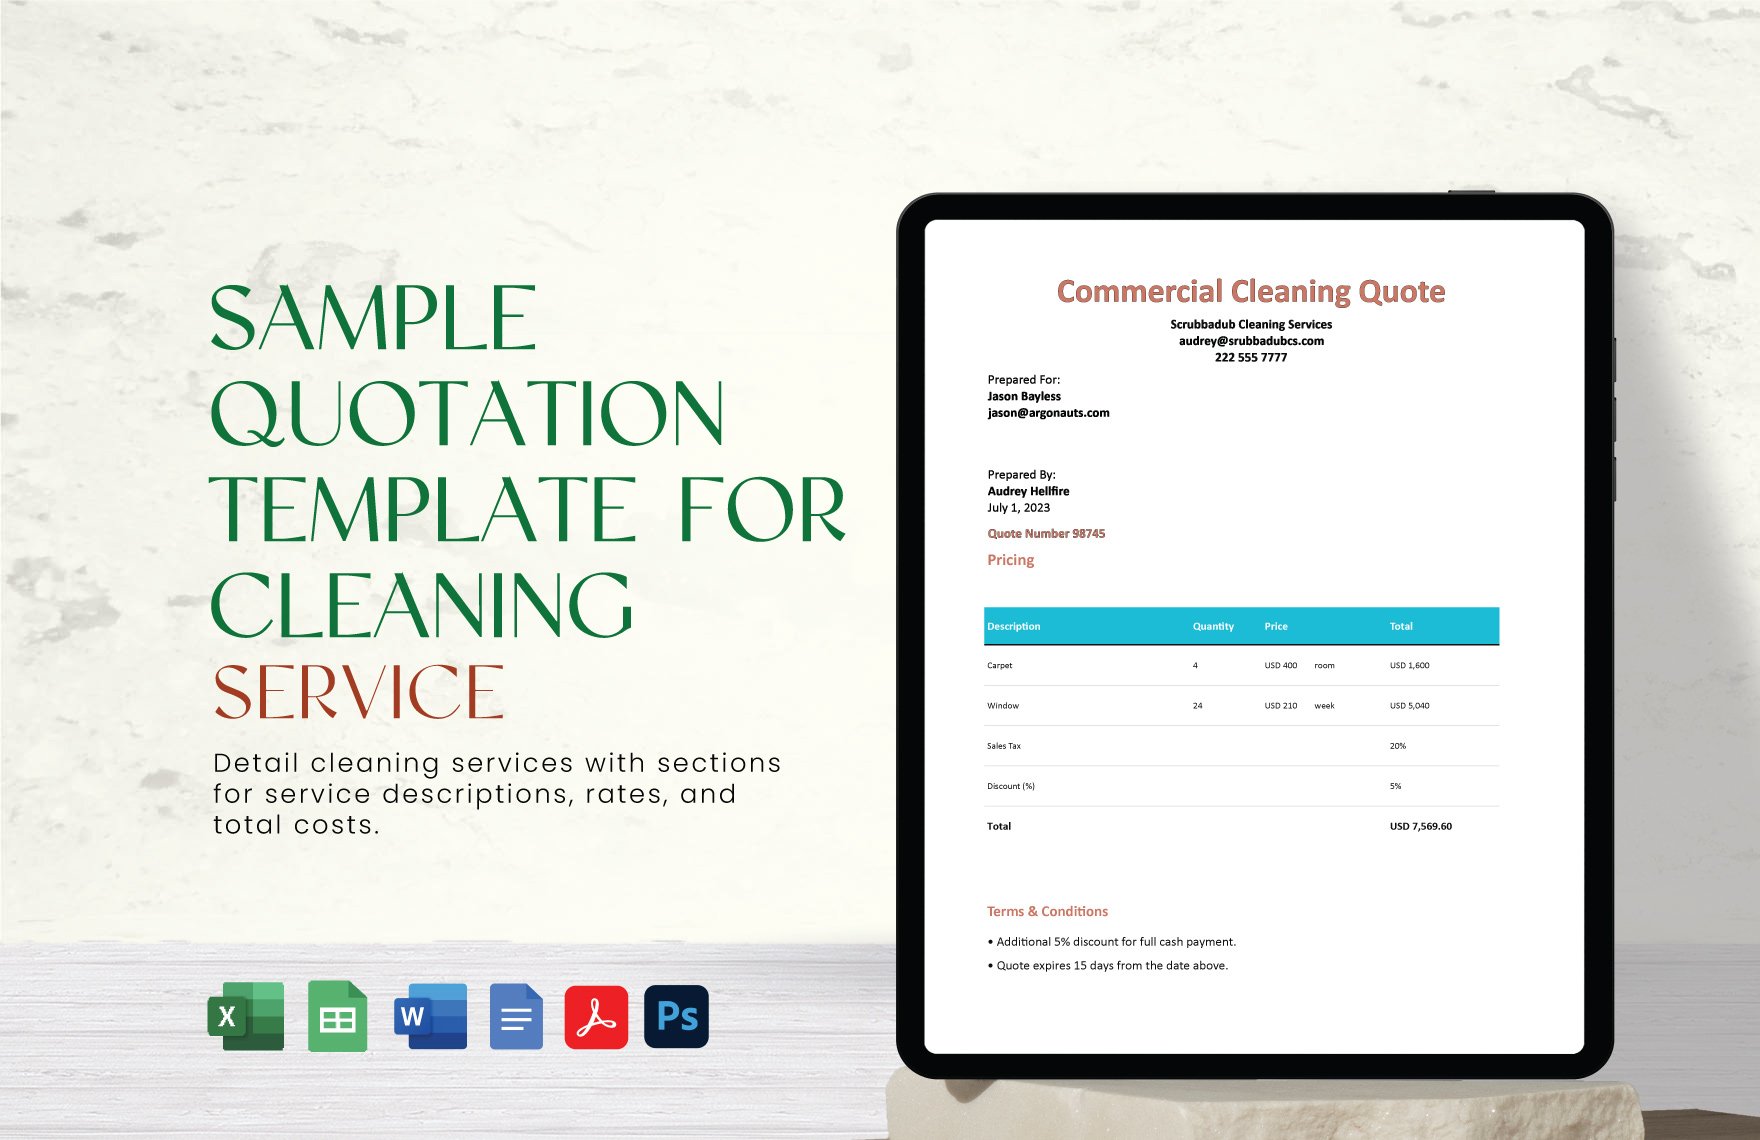 Free Sample Quotation Template For Cleaning Services in Word, Google Docs, Excel, PDF, Google Sheets, PSD